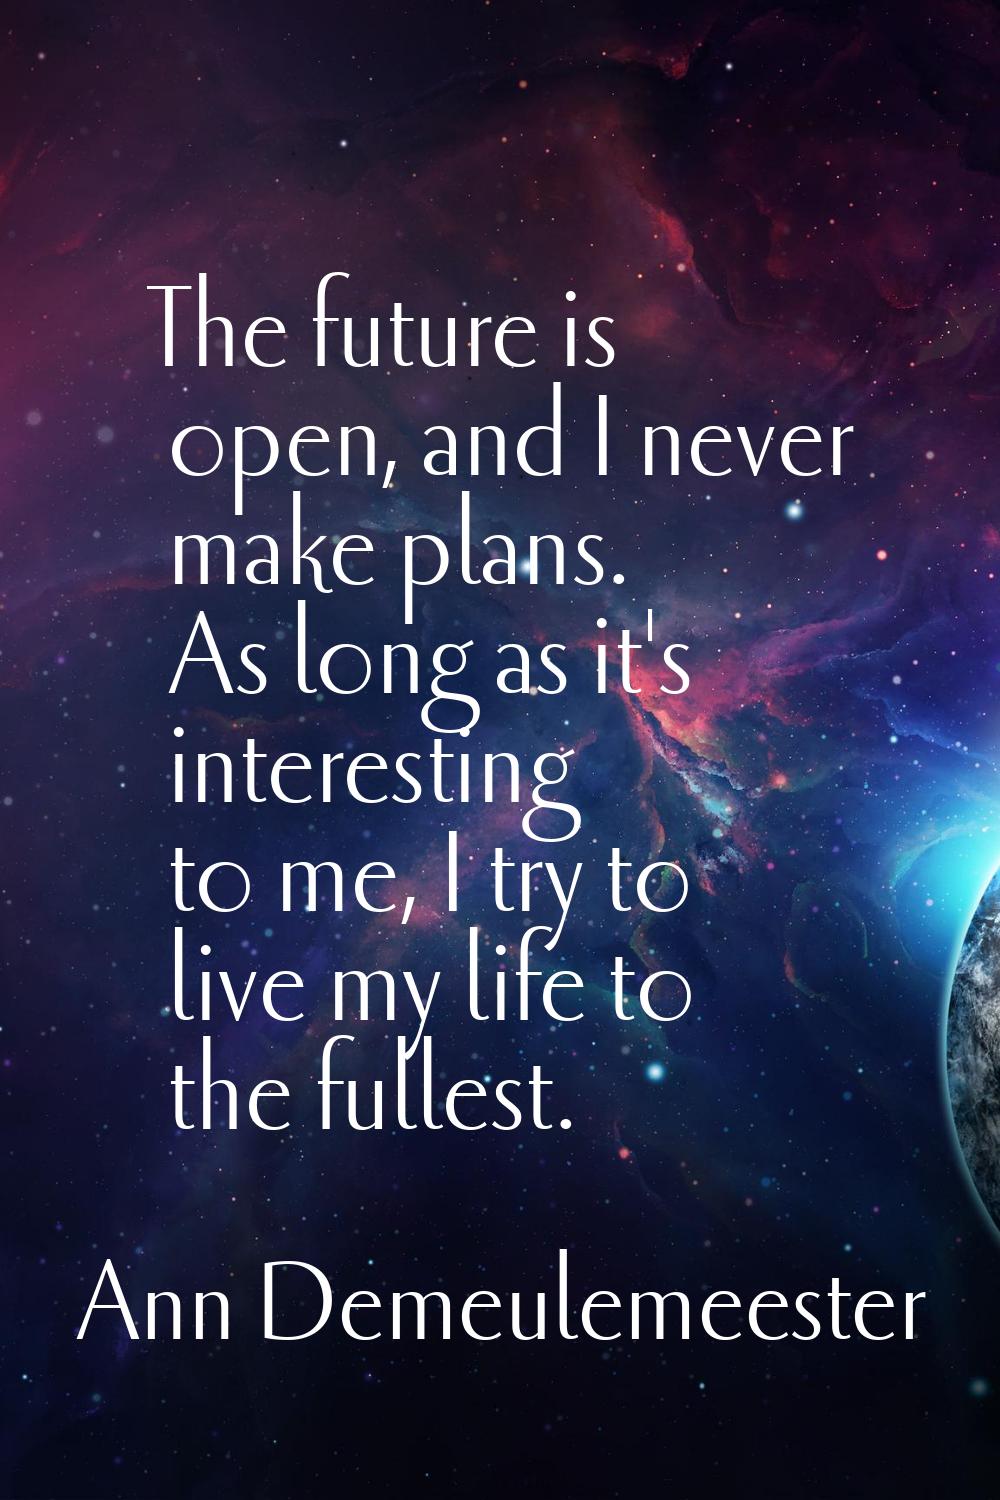 The future is open, and I never make plans. As long as it's interesting to me, I try to live my lif